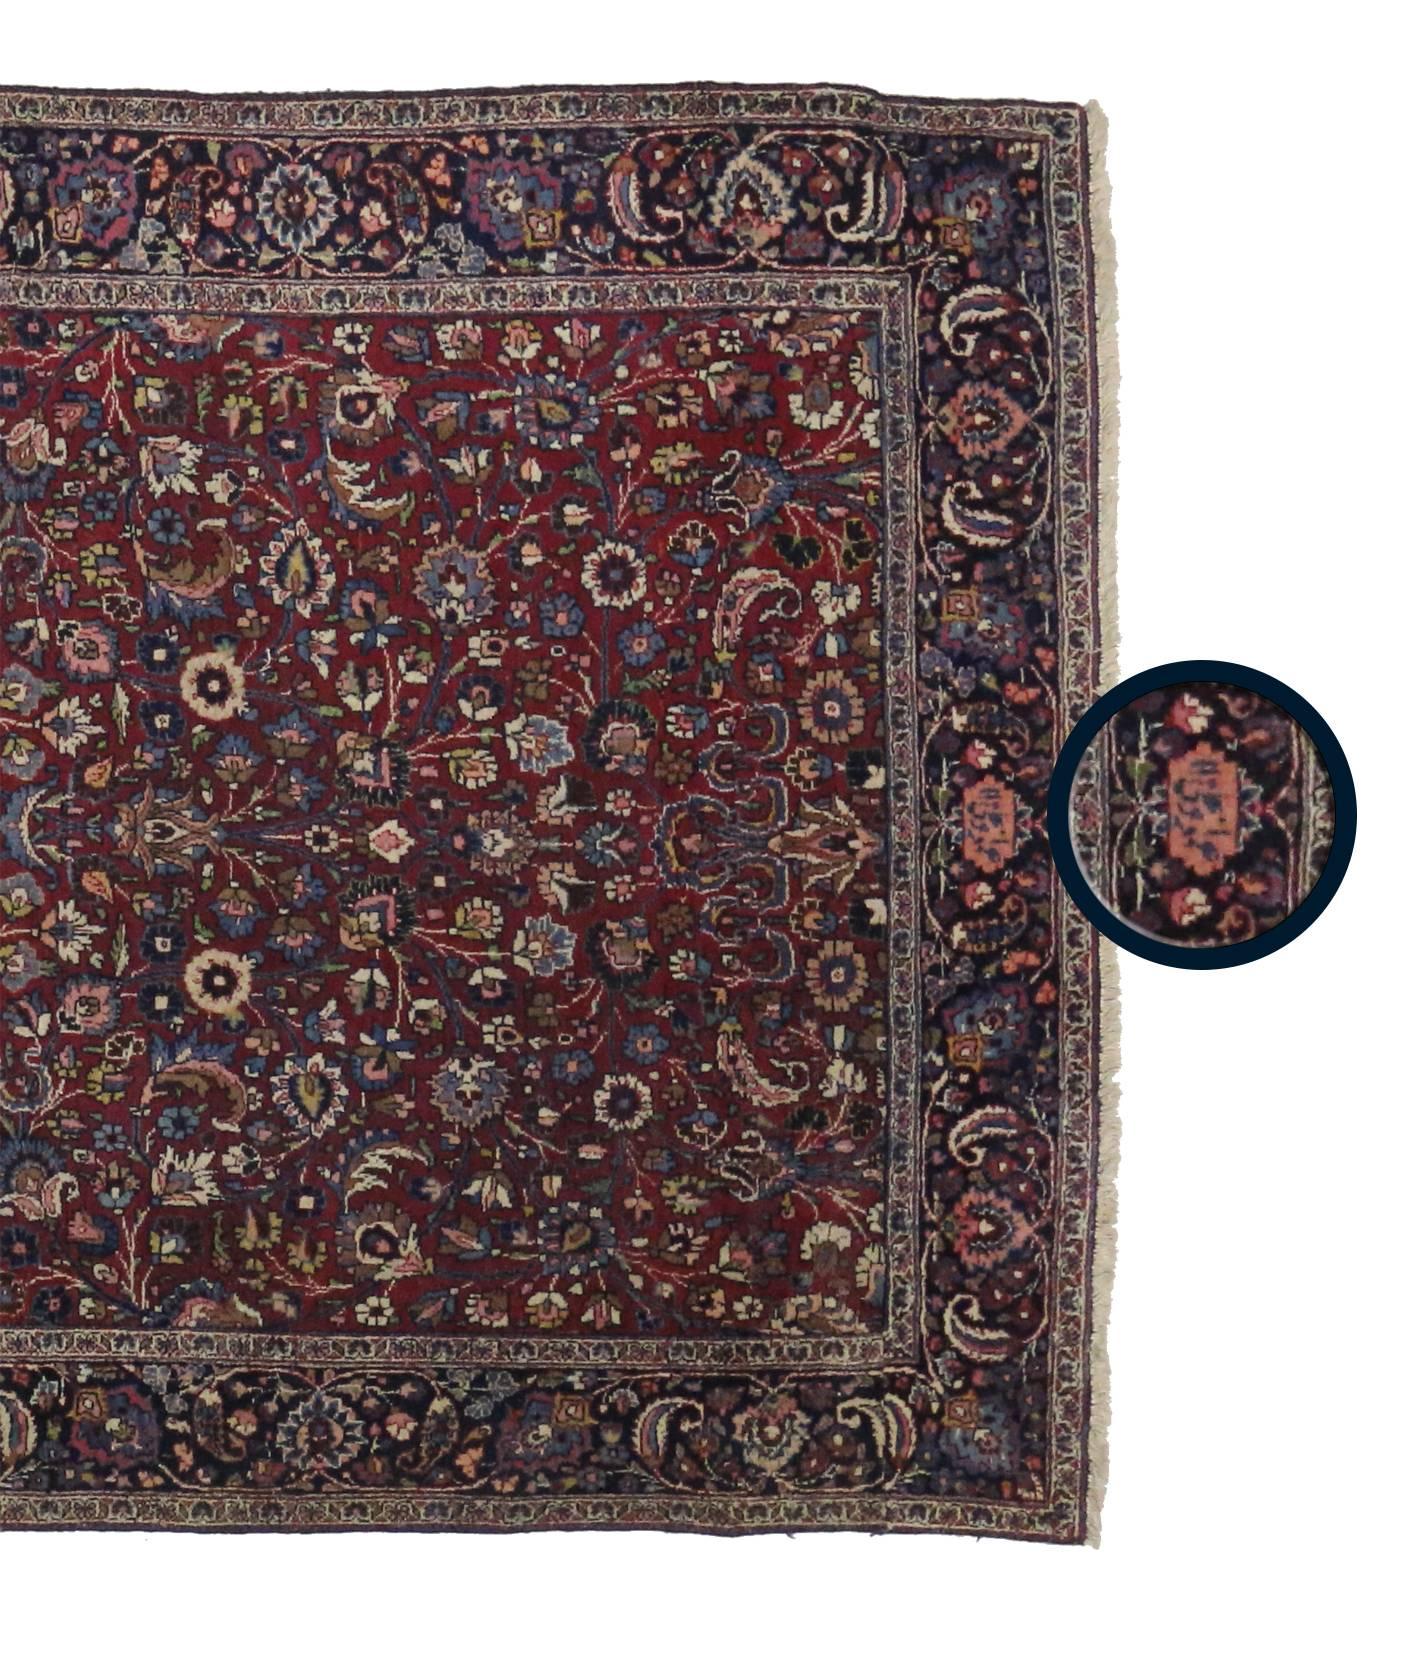 74289 Antique Persian Mashhad Runner with Old World Style, Extra-Long Hallway Runner 05'04 x 21'00. Rich in color, texture and beguiling ambiance, this hand knotted wool antique Persian Mashhad rug runner beautifully displays timeless elegance and